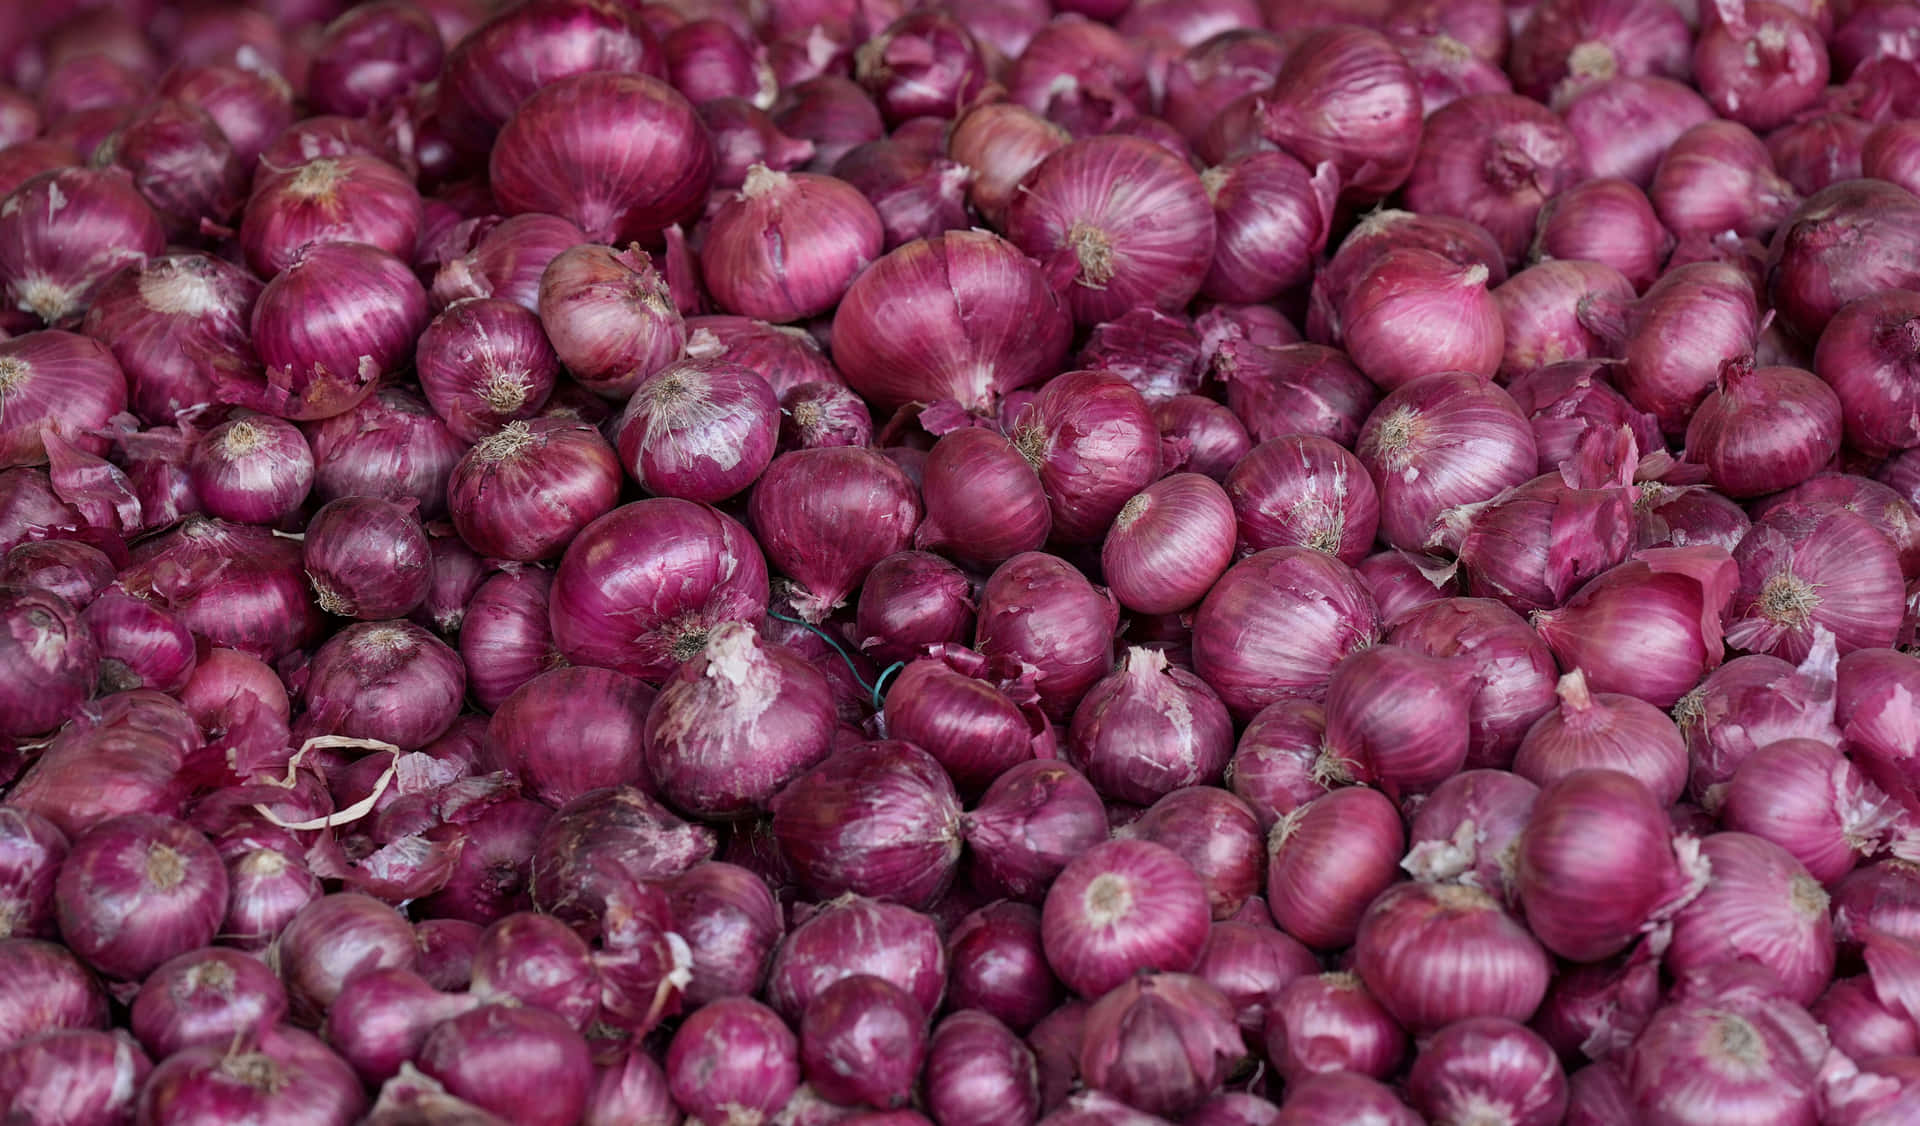 A vibrant bunch of organic purple onions ready for the kitchen!" Wallpaper